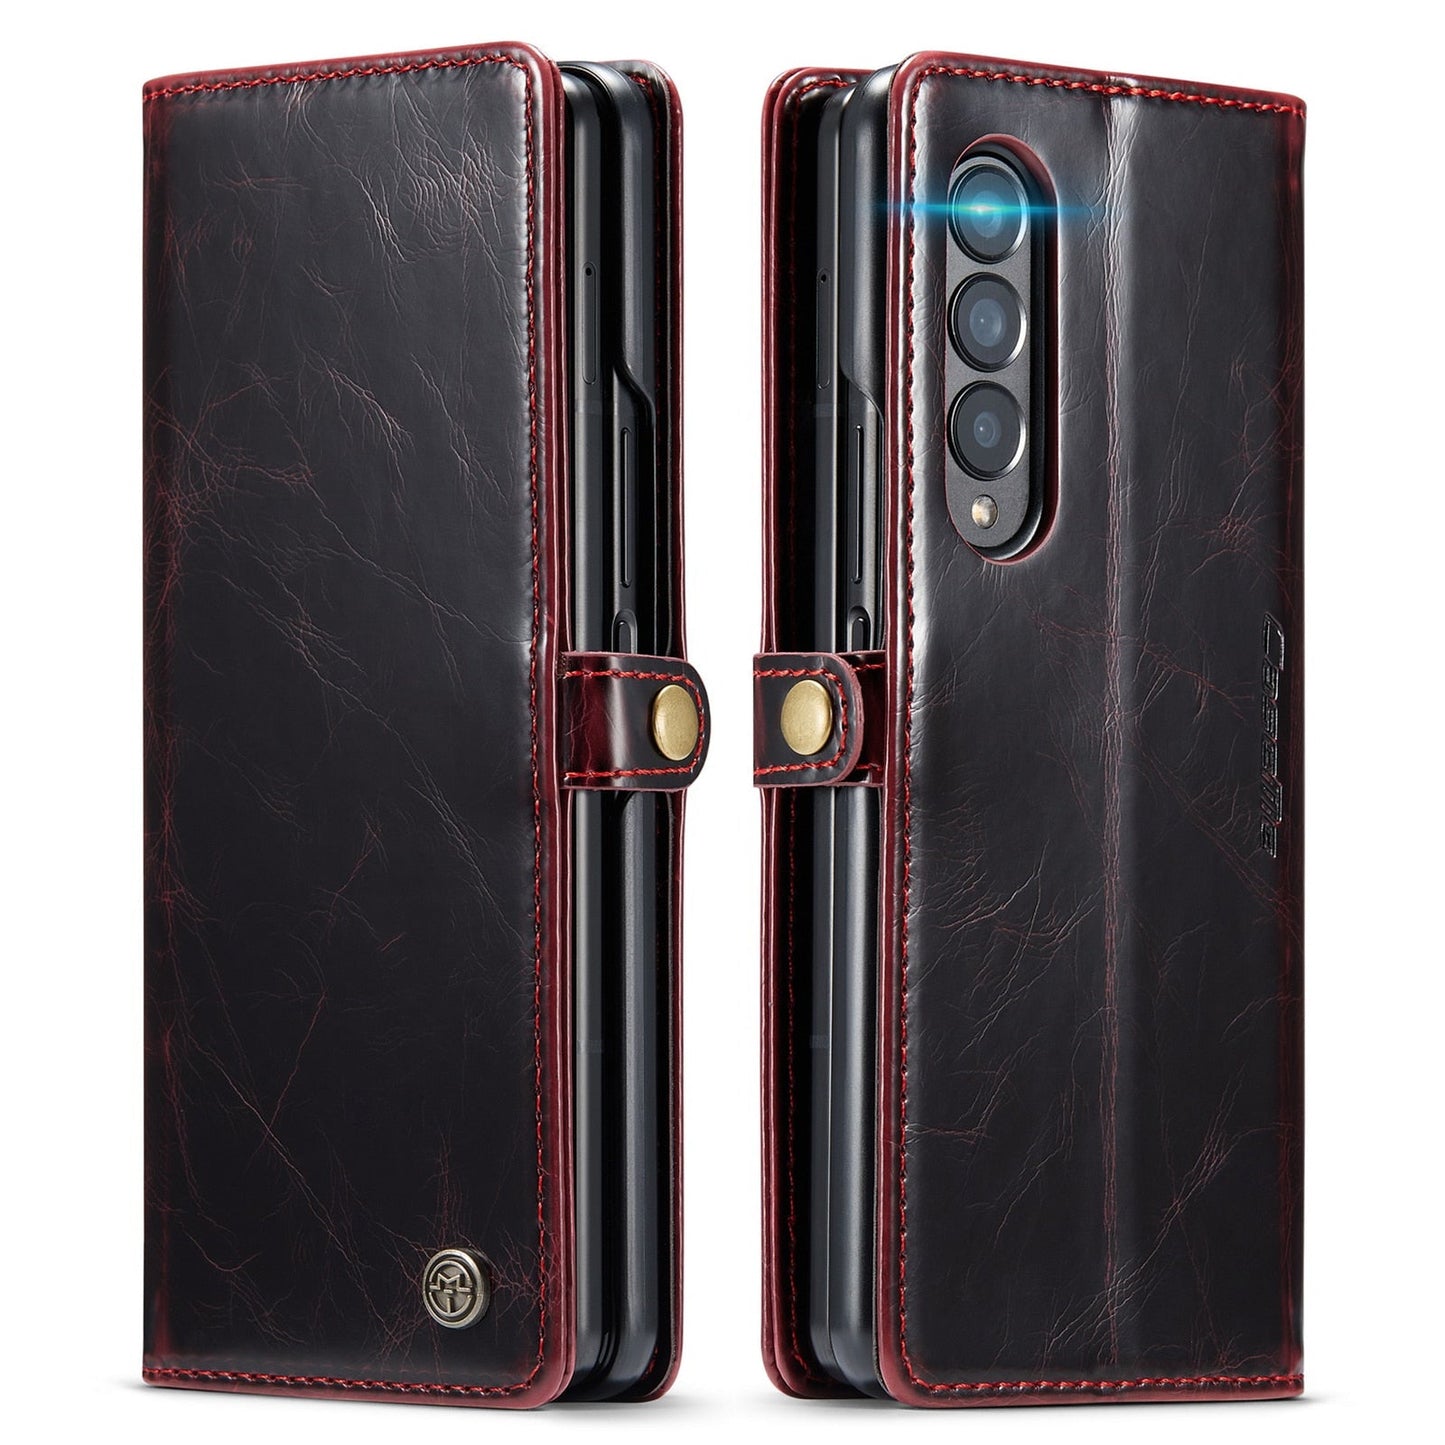 Full Protection Business Wallet Case